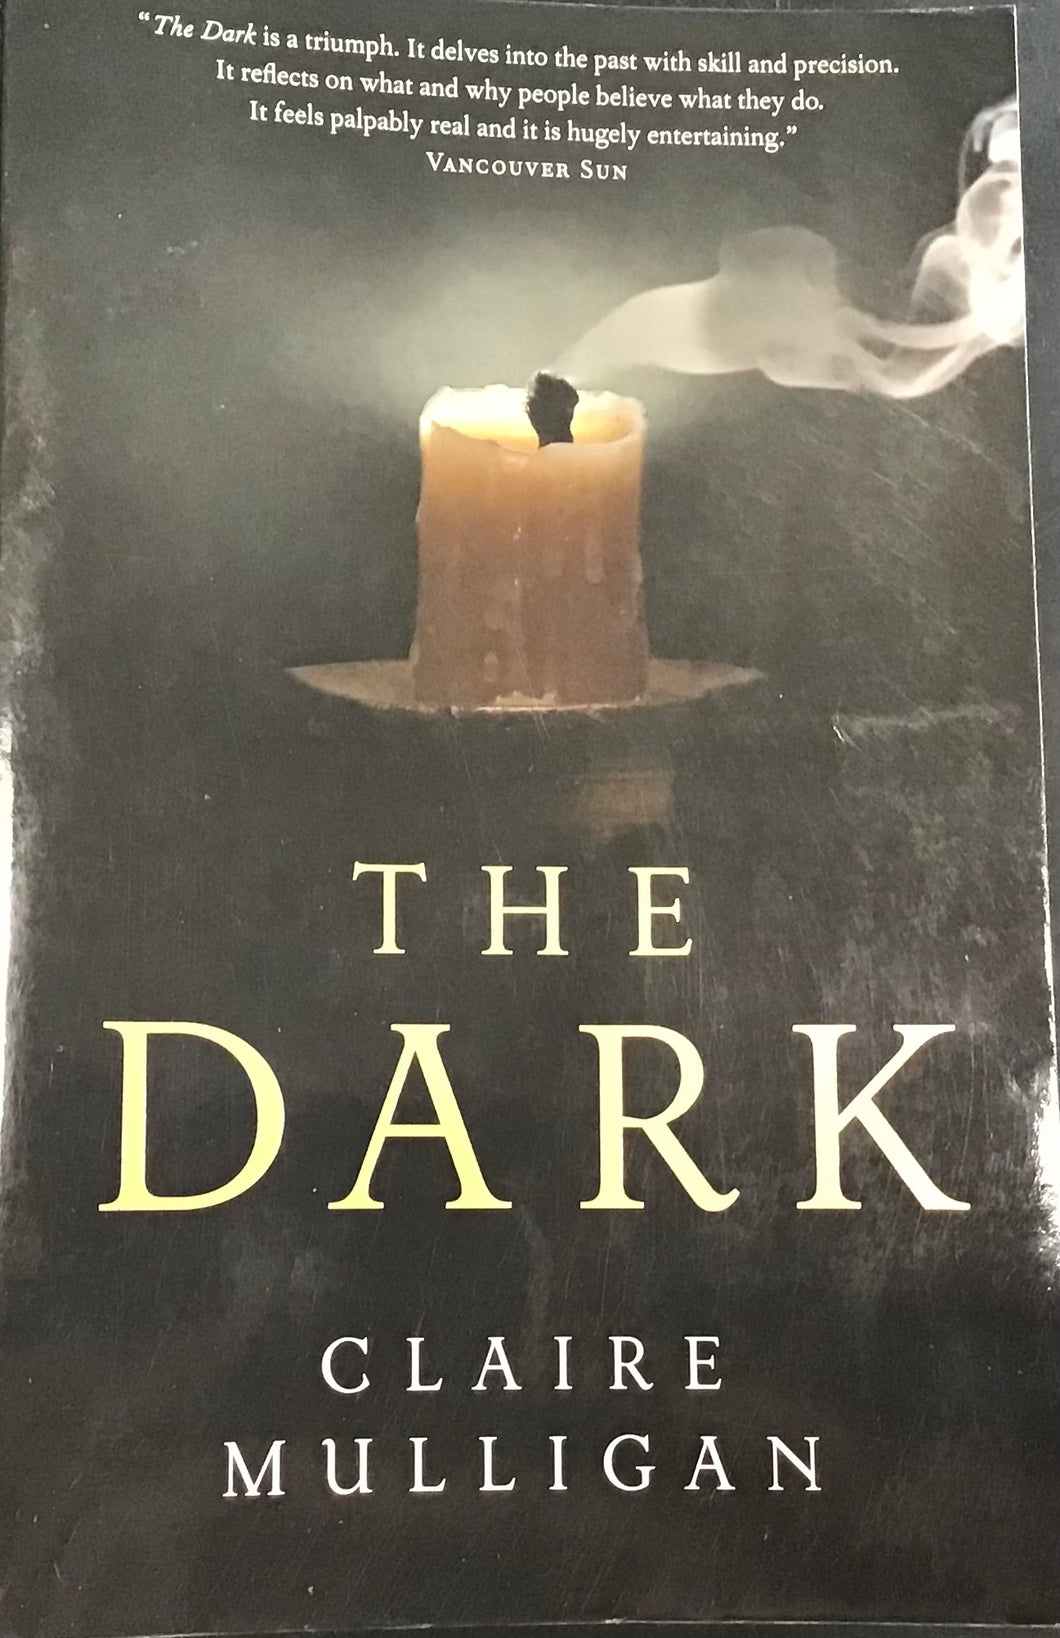 The Dark by Claire Mulligan